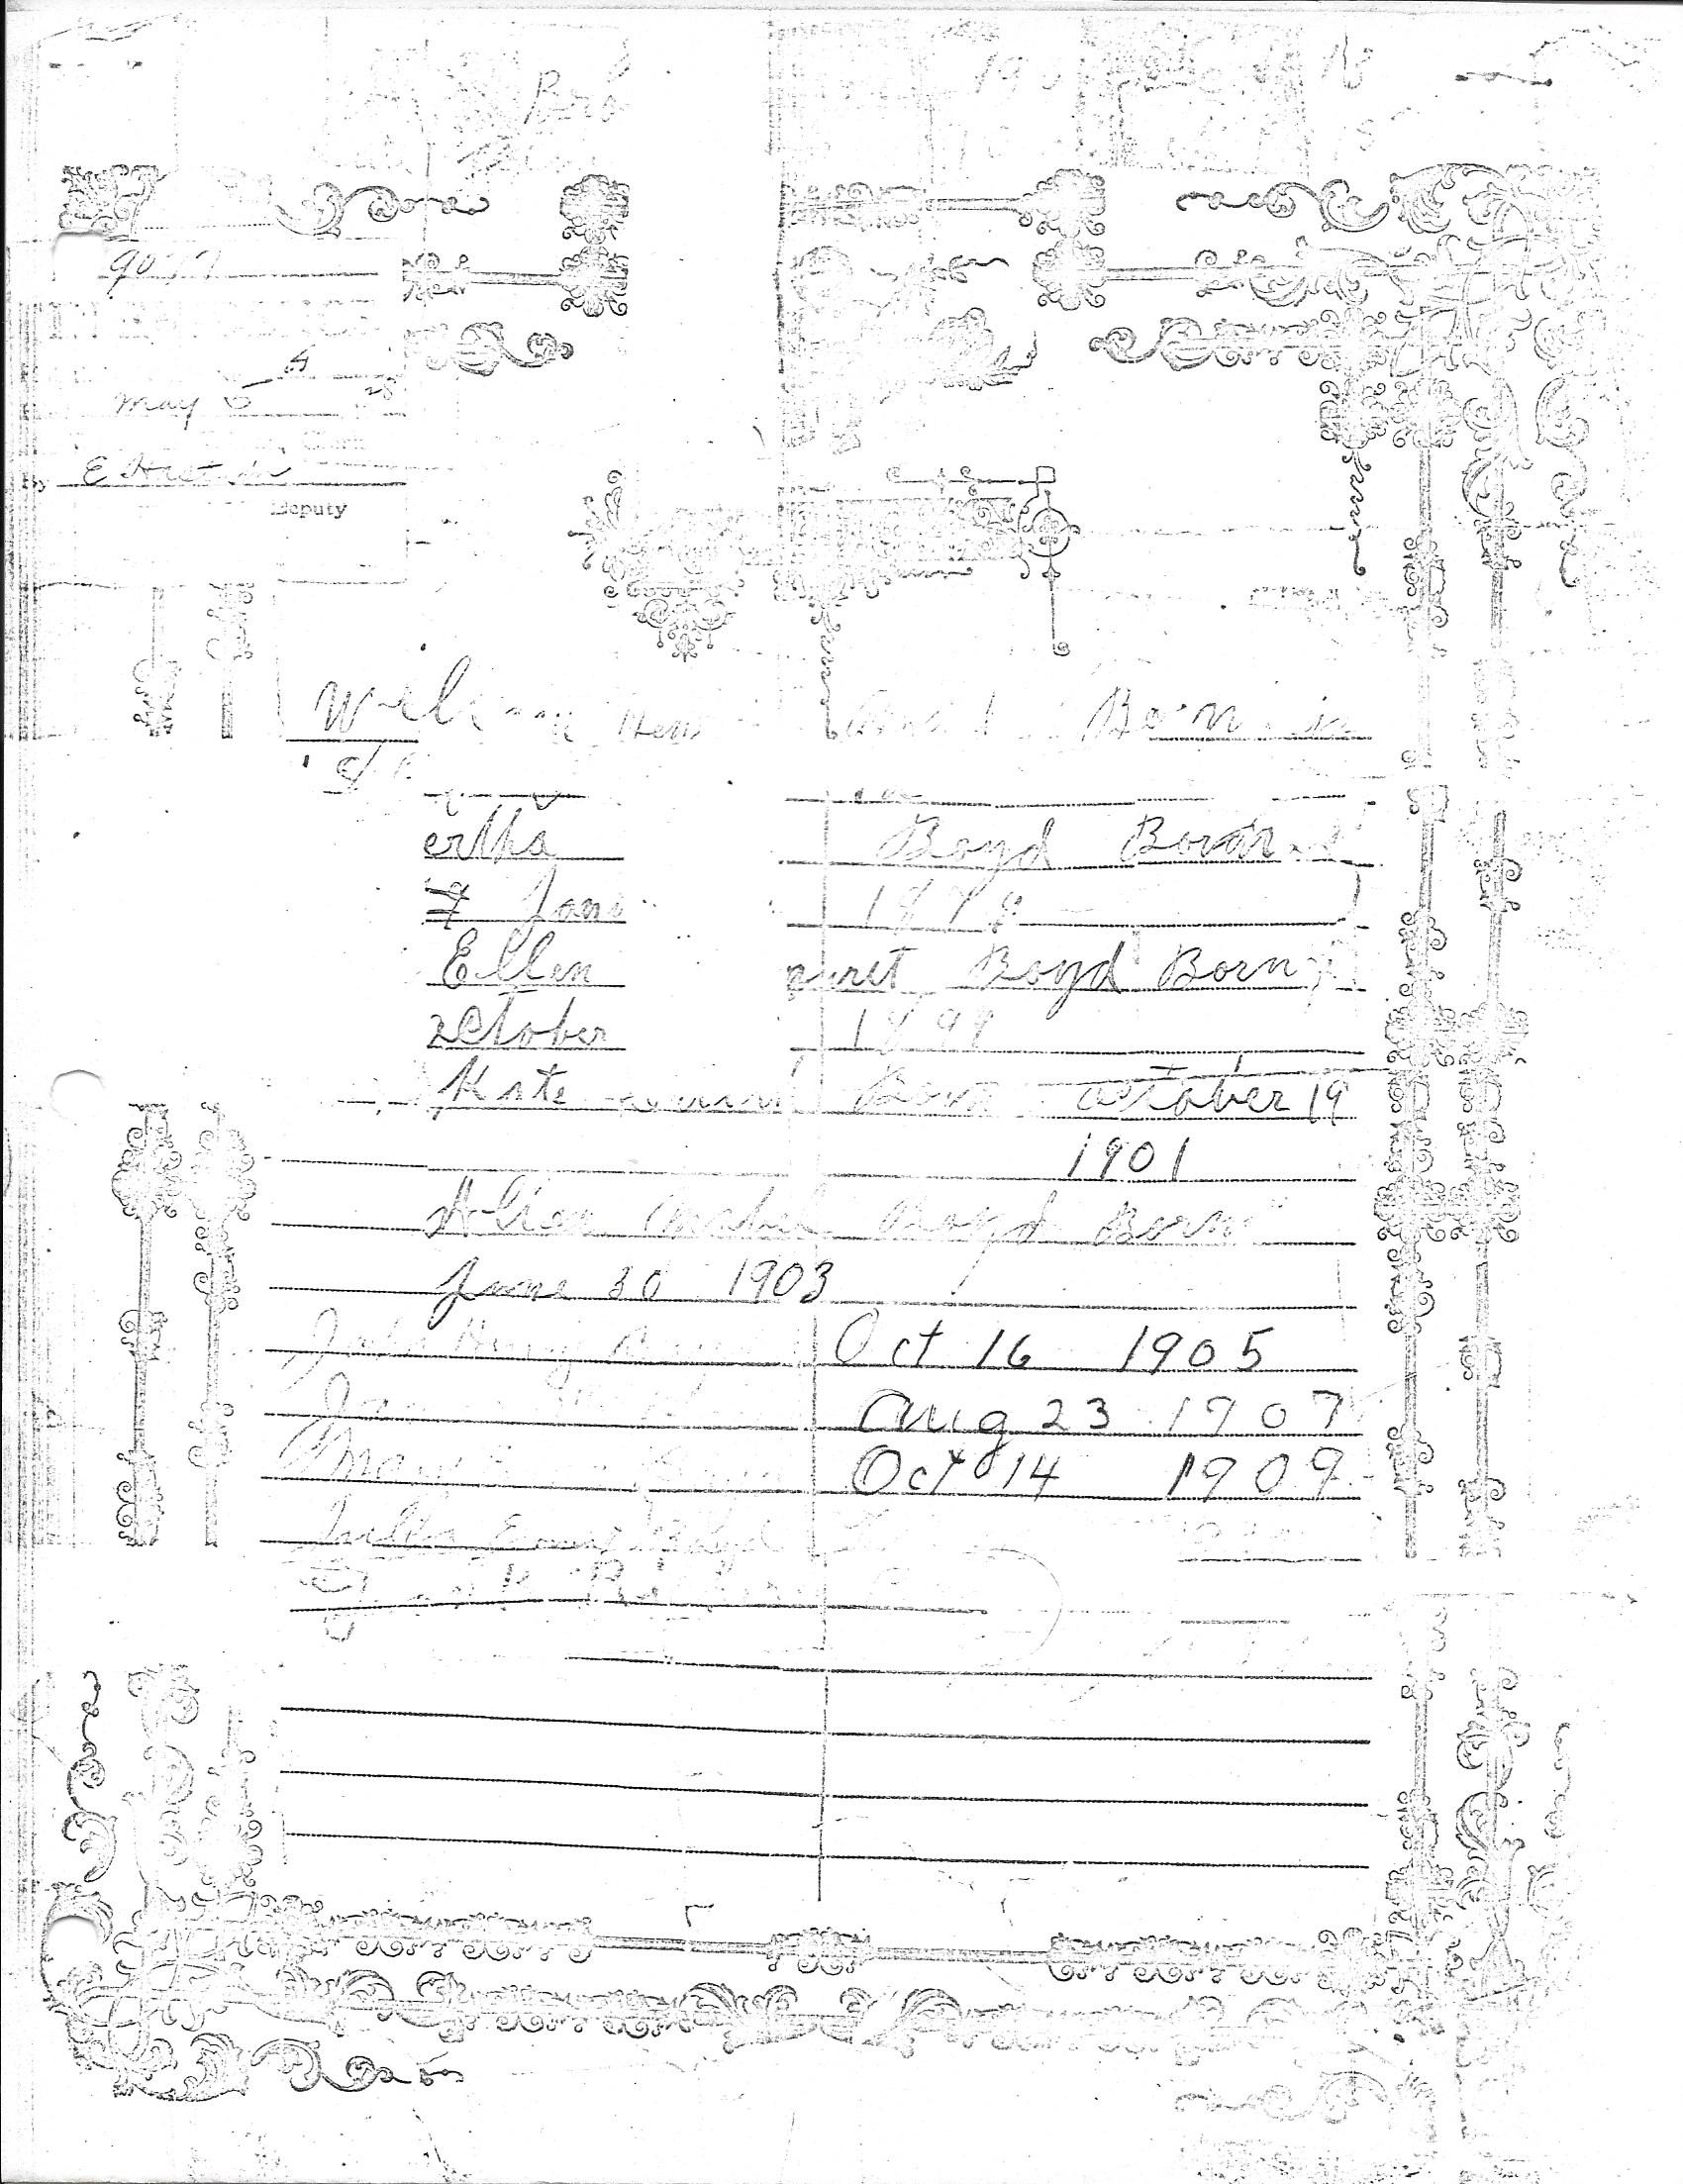 Faded copy of a page from the Boyd family Bible with names and dates